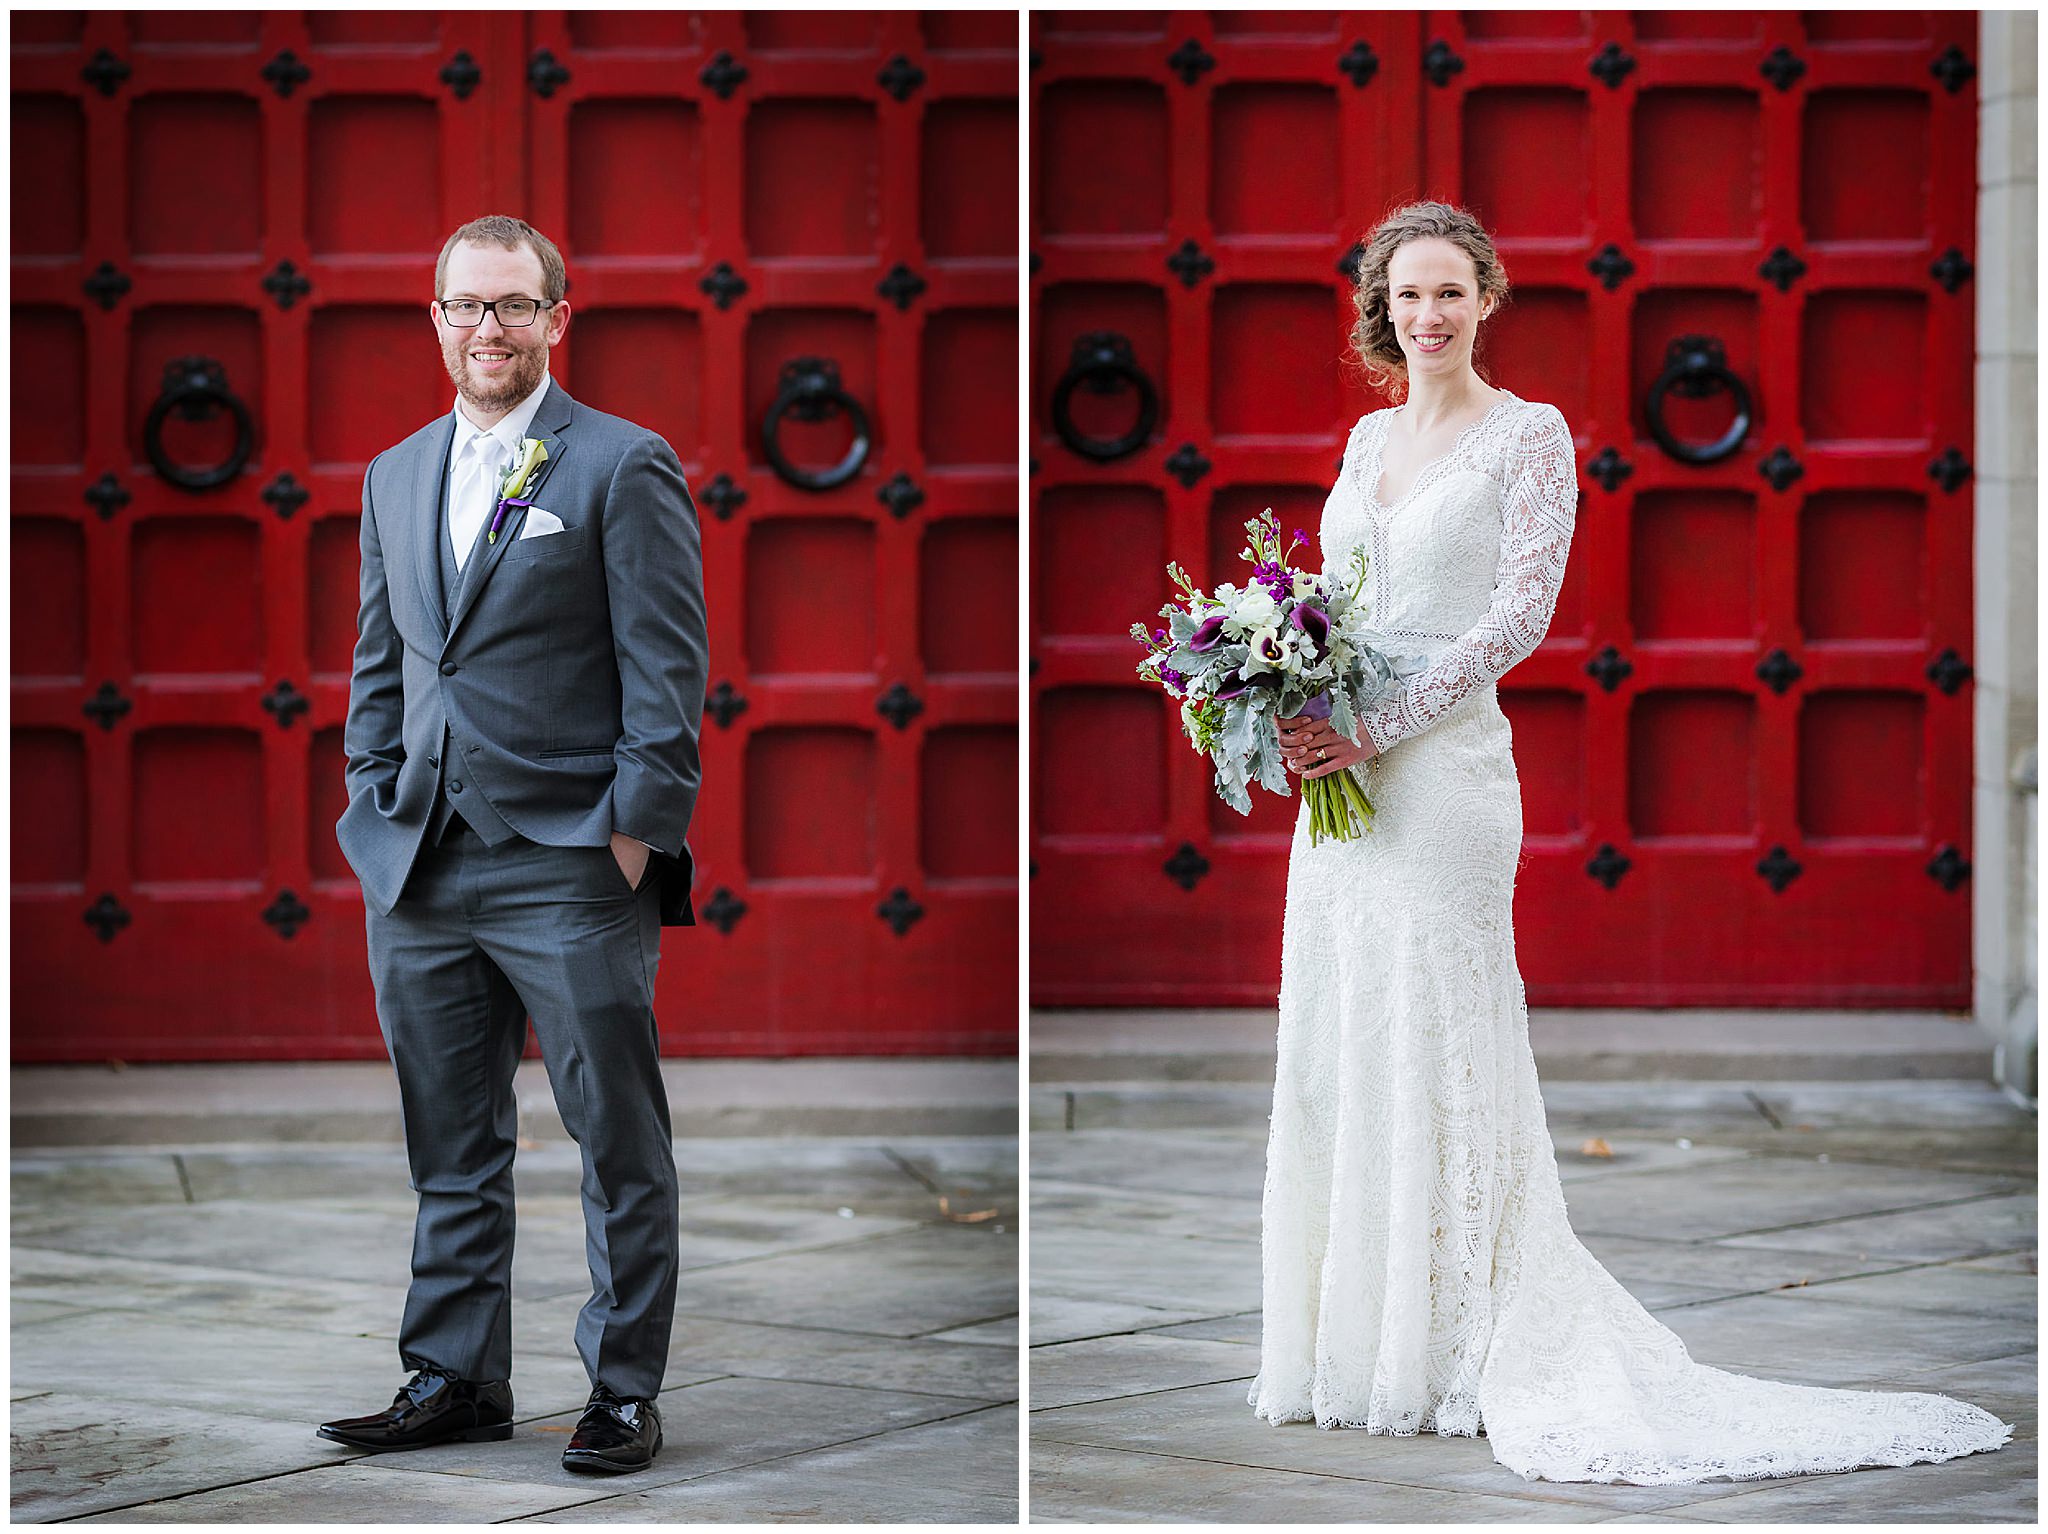 Bride & groom portraits in front of the red doors at the Cathedral of Learning in Pittsburgh PA